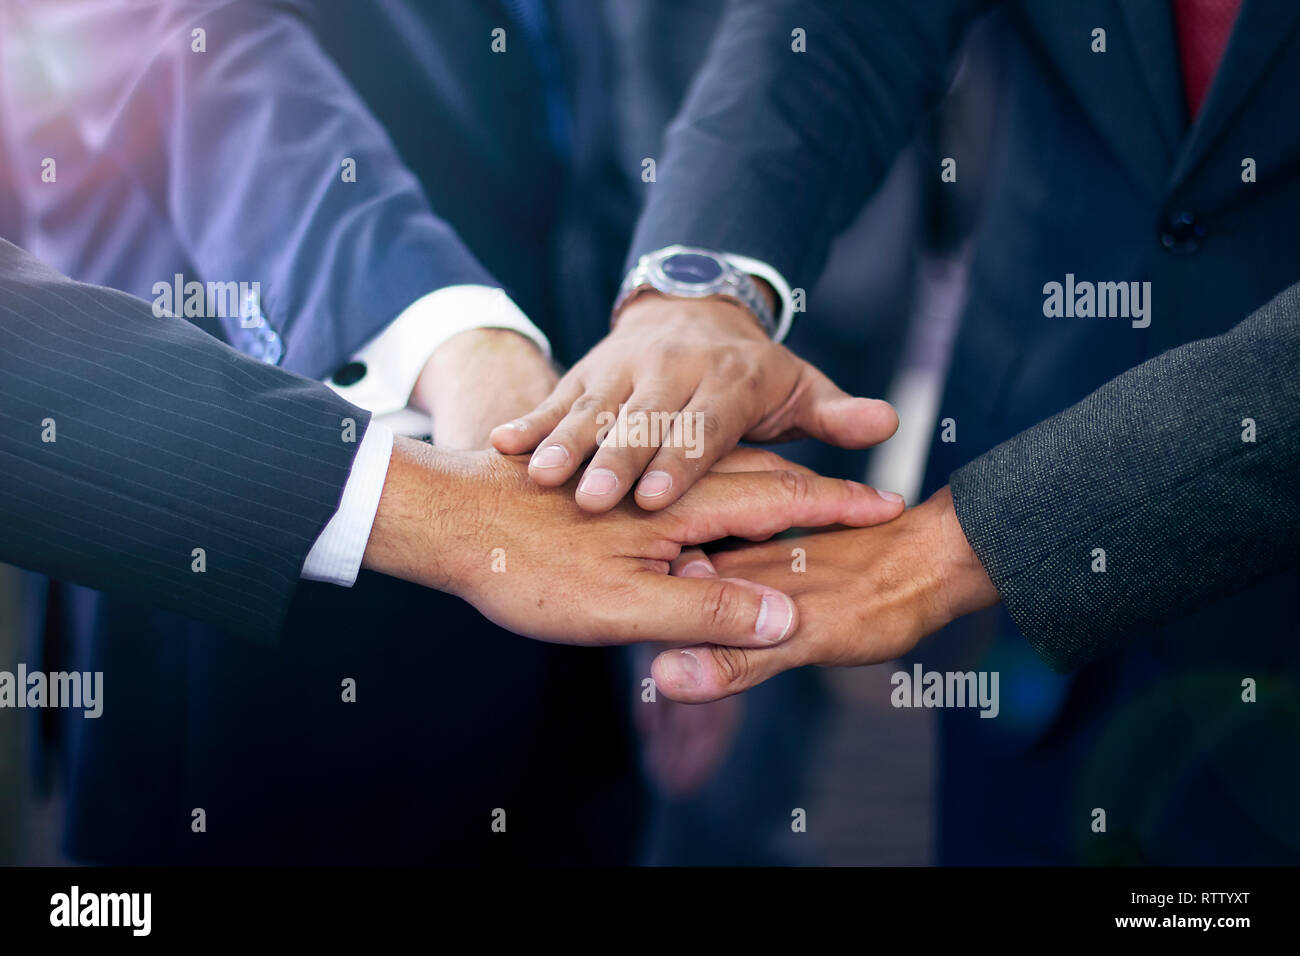 Group of hispanic business people joining hands wearing suits, teamwork and collaboration concept Stock Photo